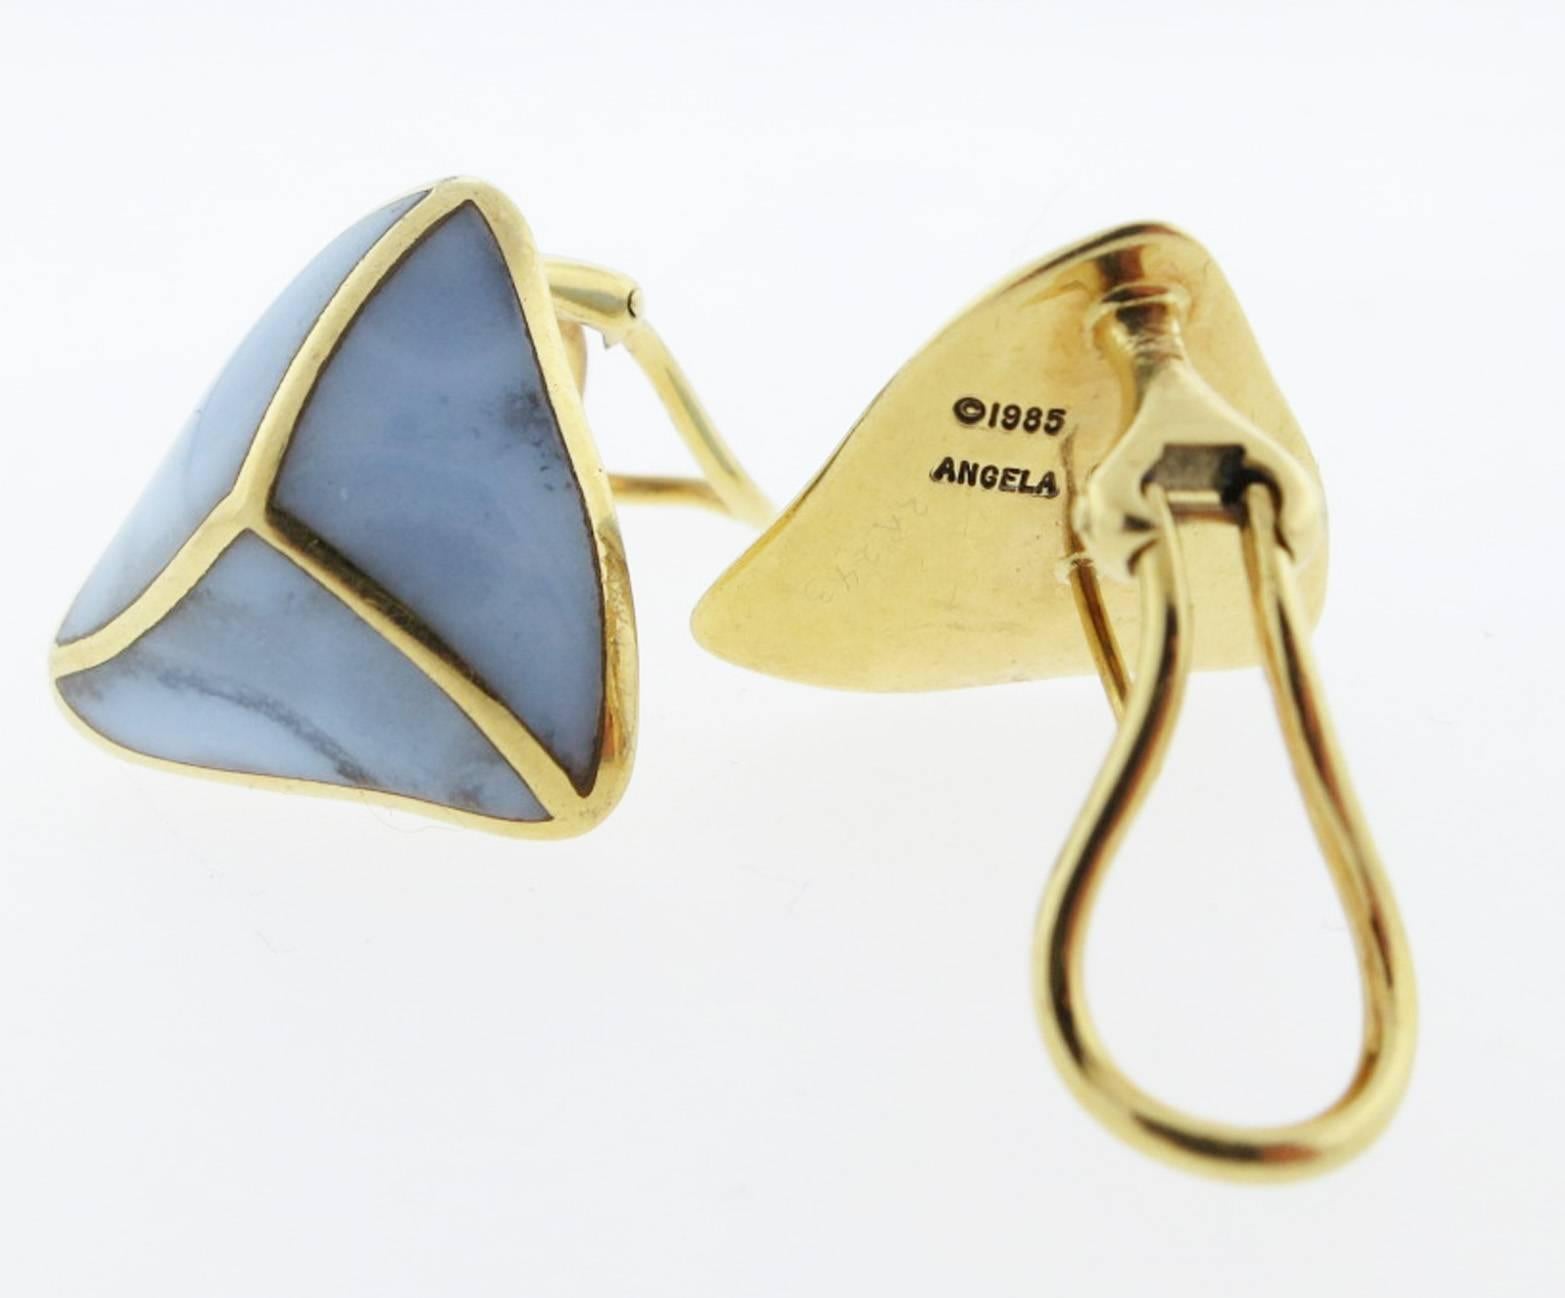 Angelia Cummings 18kt. yellow gold dimensional triangular shape pierced and post back earrings made in 1985.